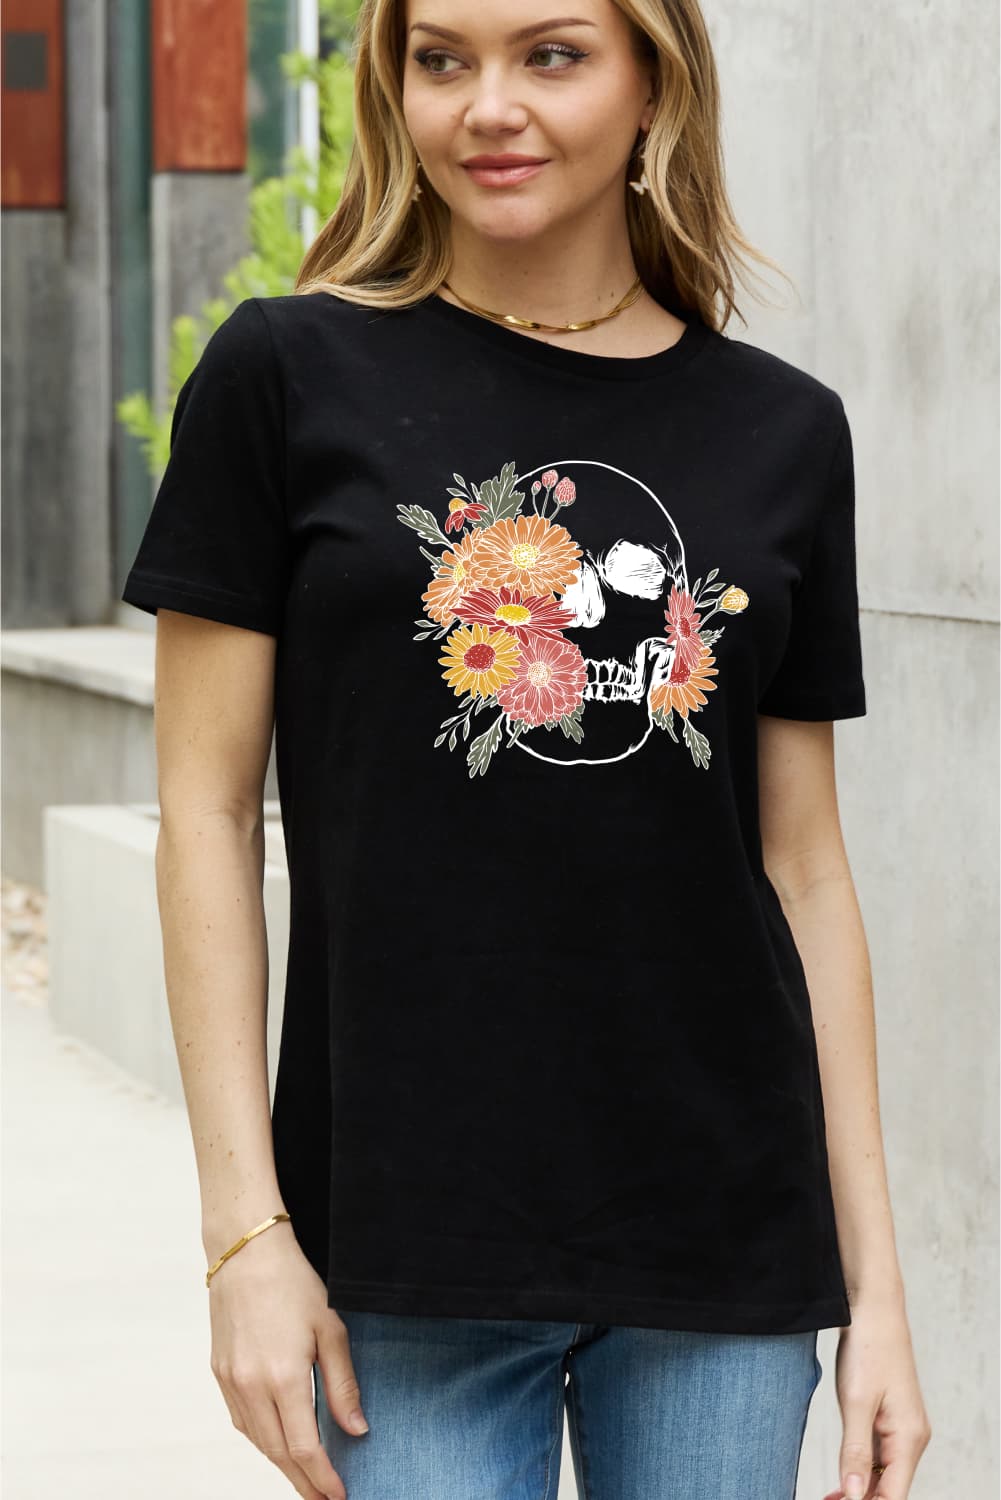 Simply Love Full Size Flower Skull Graphic Cotton Tee